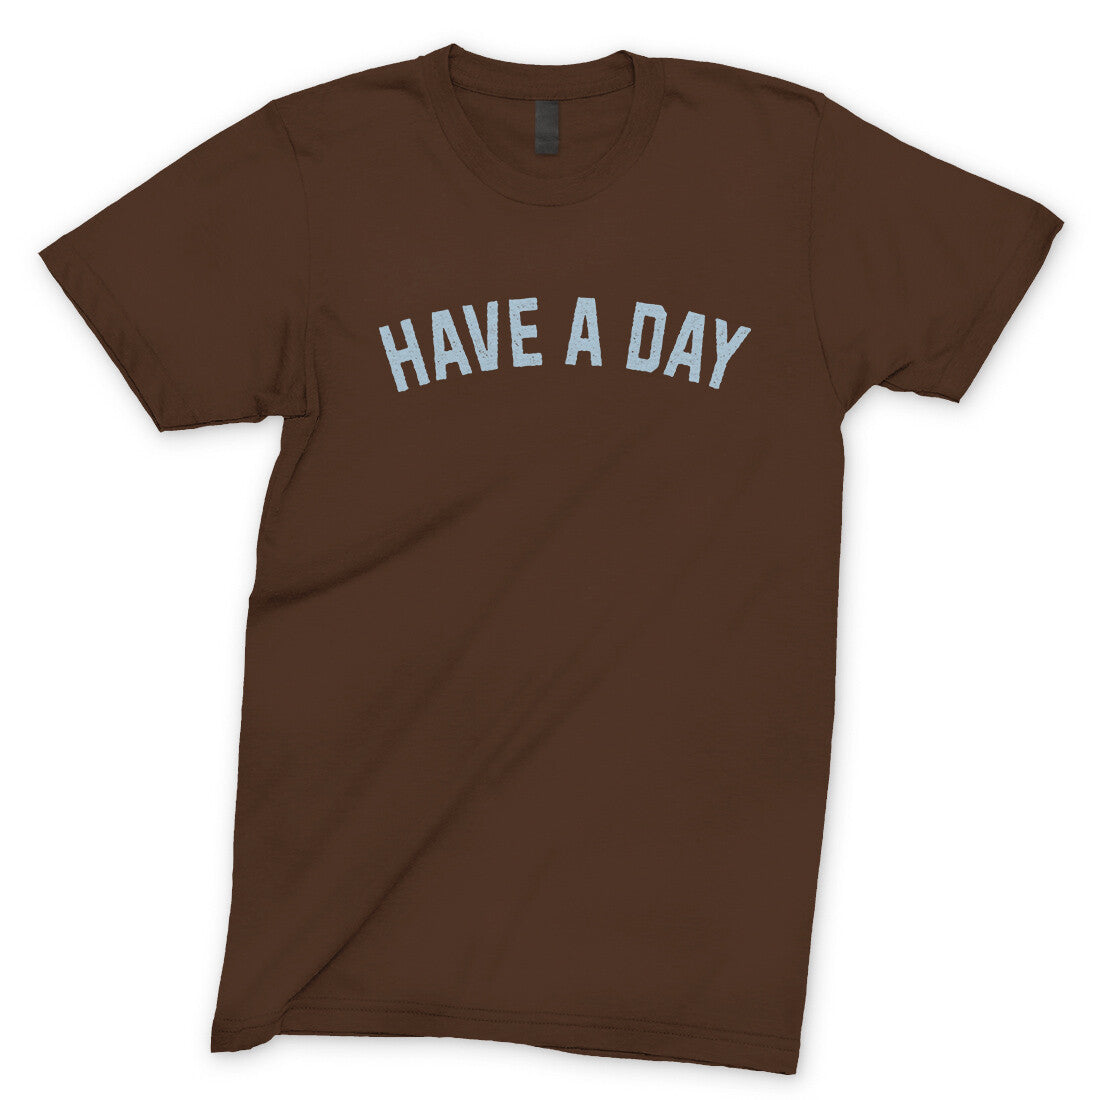 Have a Day in Dark Chocolate Color